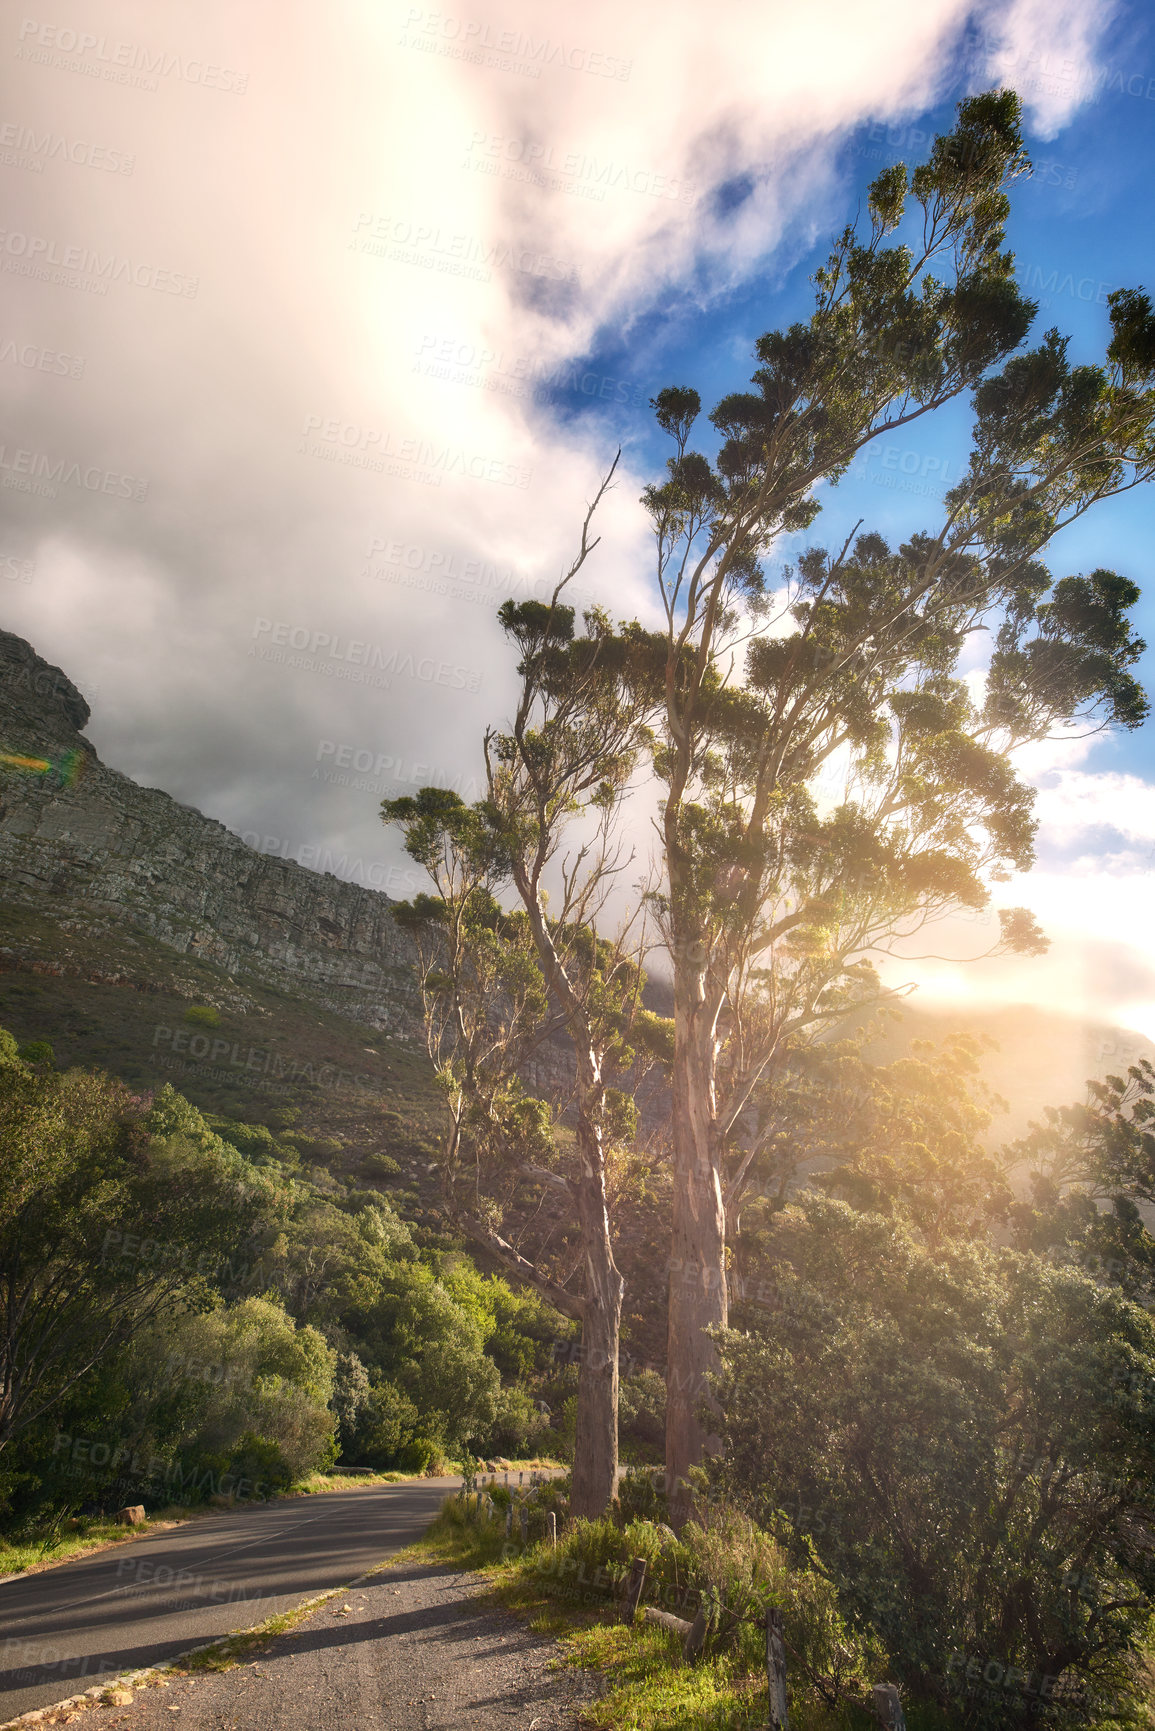 Buy stock photo Scenic landscape view of Table Mountain National Park, Cape Town in South Africa. Beautiful scenery of a natural environment, roads, and the street against a cloudy blue sky in a popular tourist city